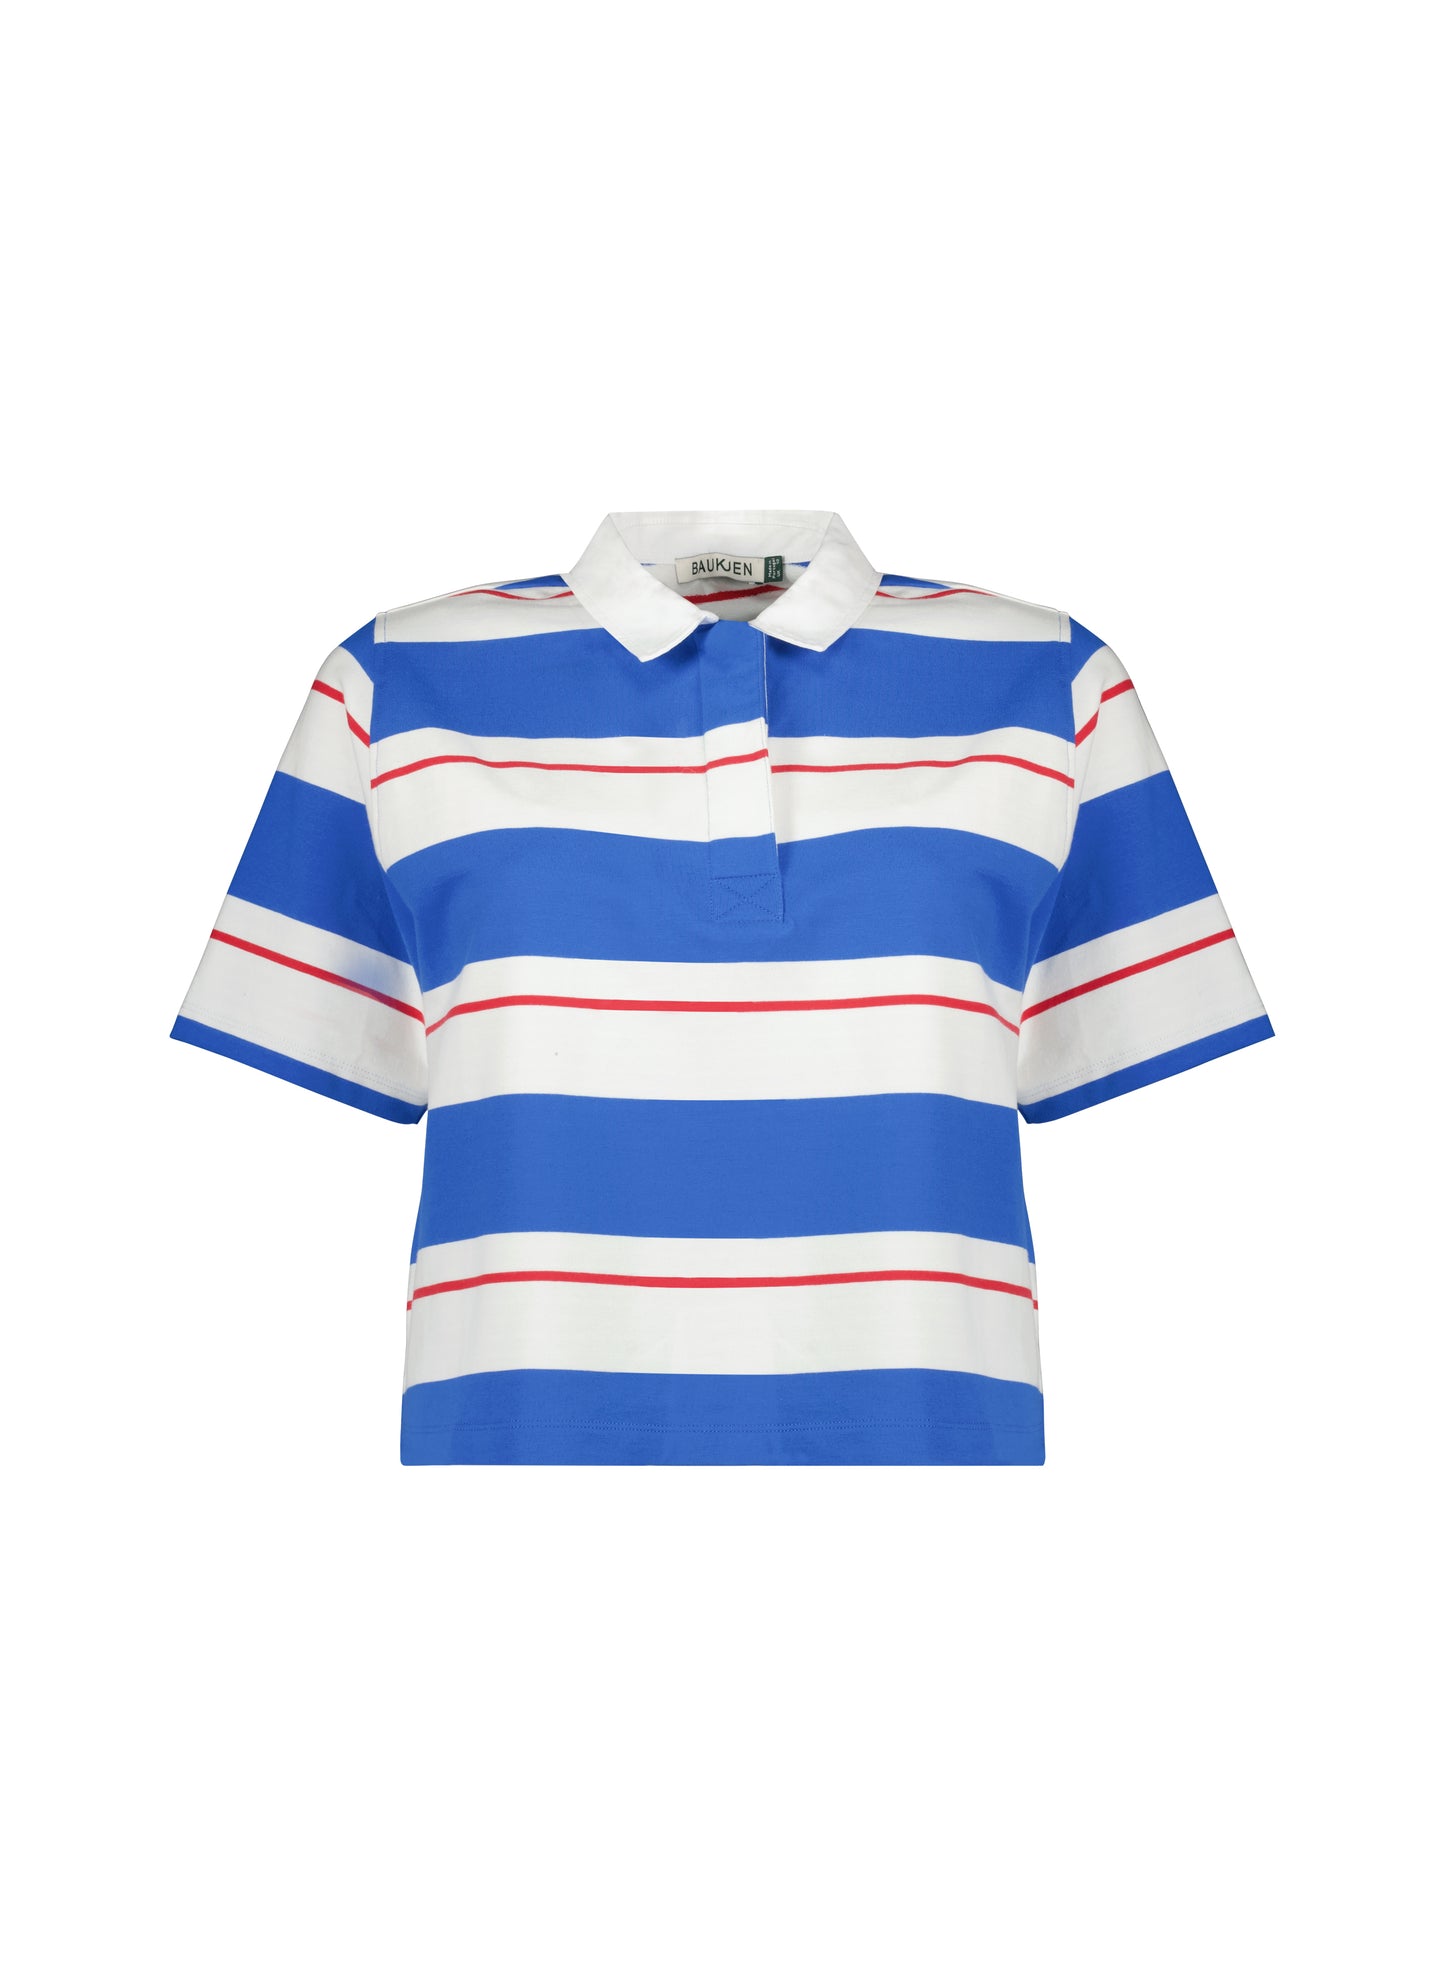 Delilah Organic Cotton Rugby Top